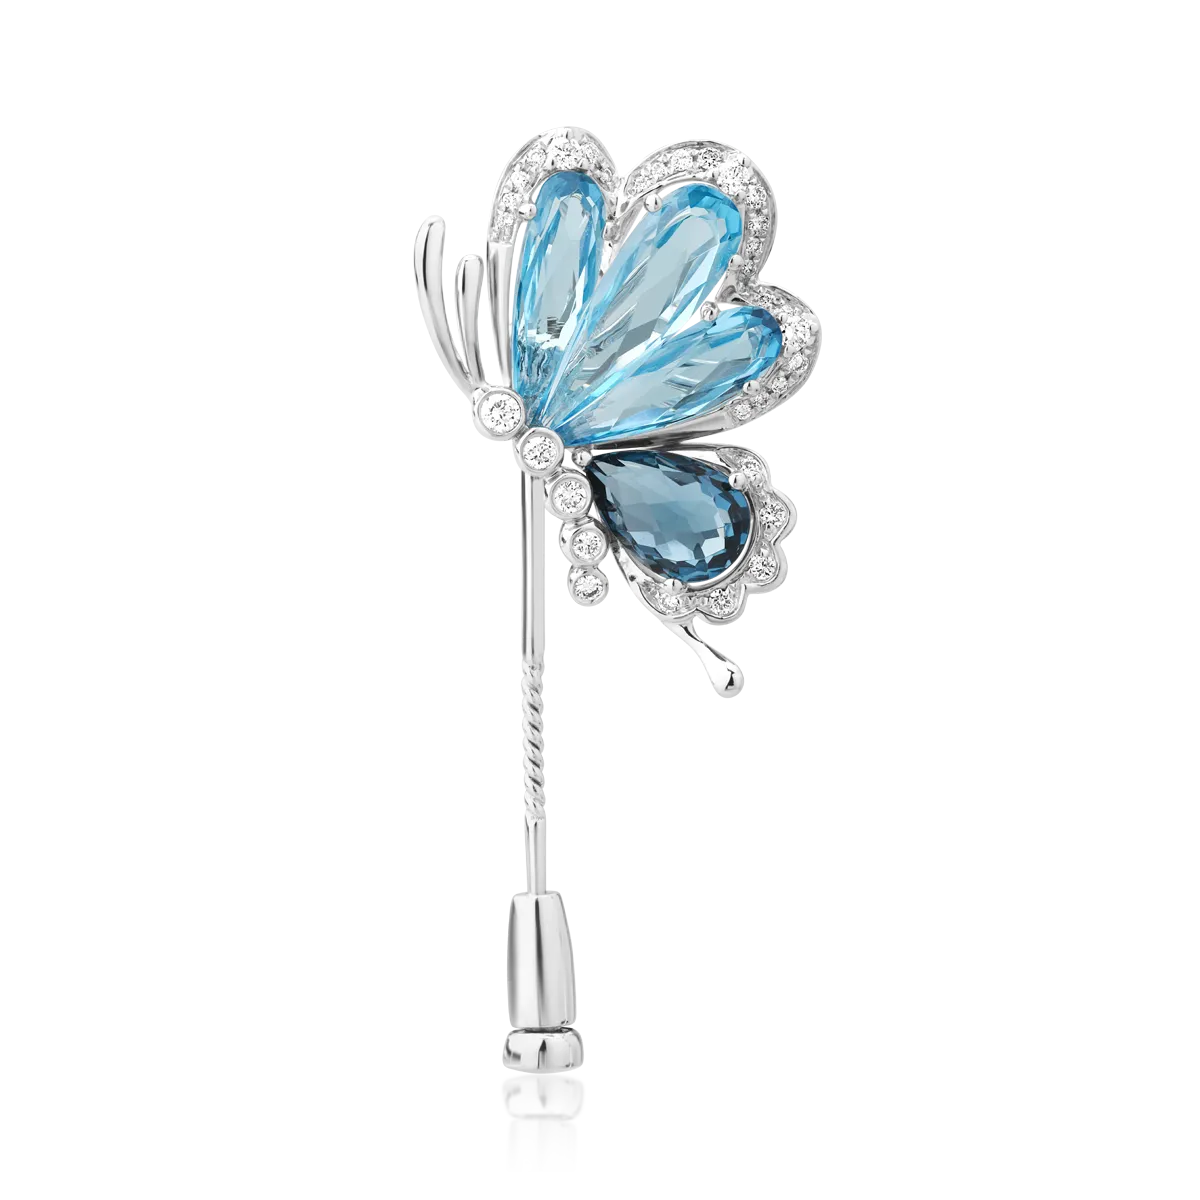 18K white gold brooch with london blue topaz of 1.9ct and blue topaz of 4.9ct